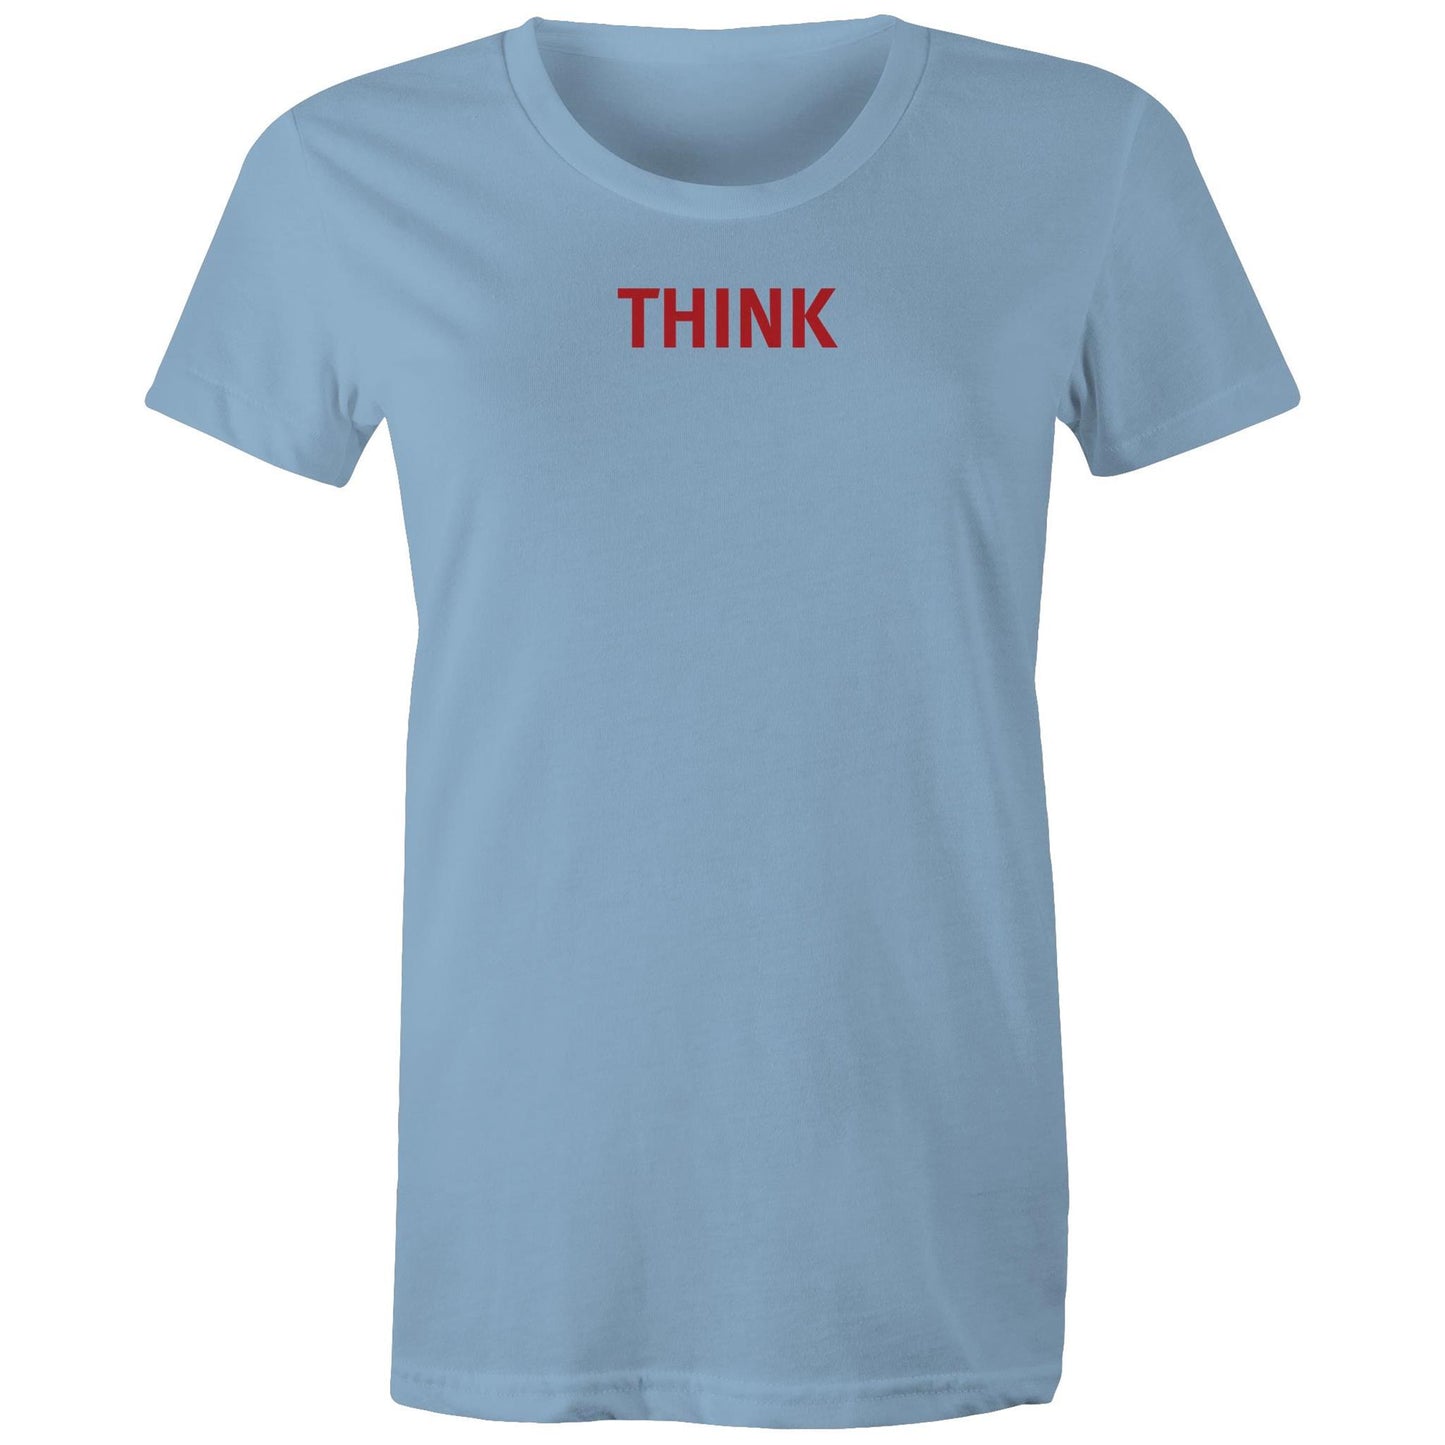 THINK Word T Shirts for Women